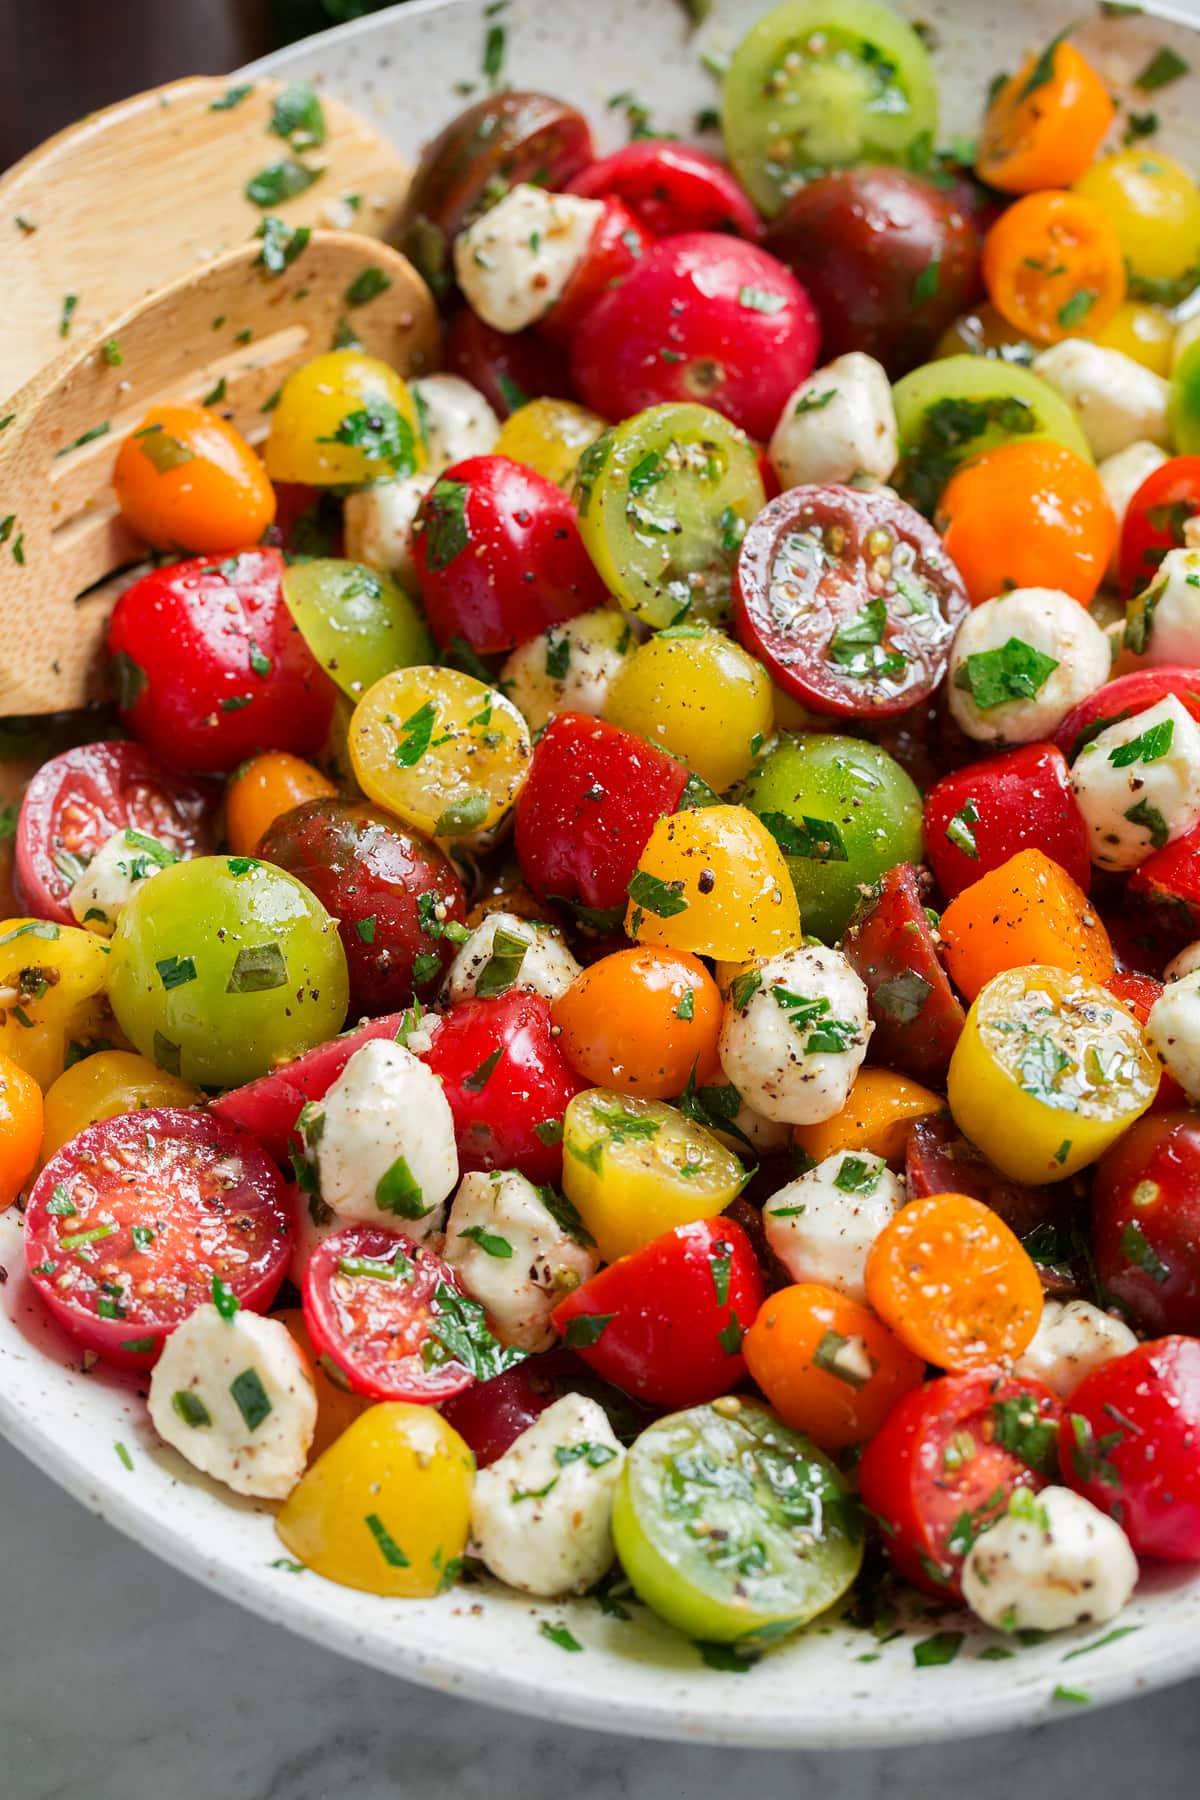 Image showing tomato salad from a side angle in a serving bowl.